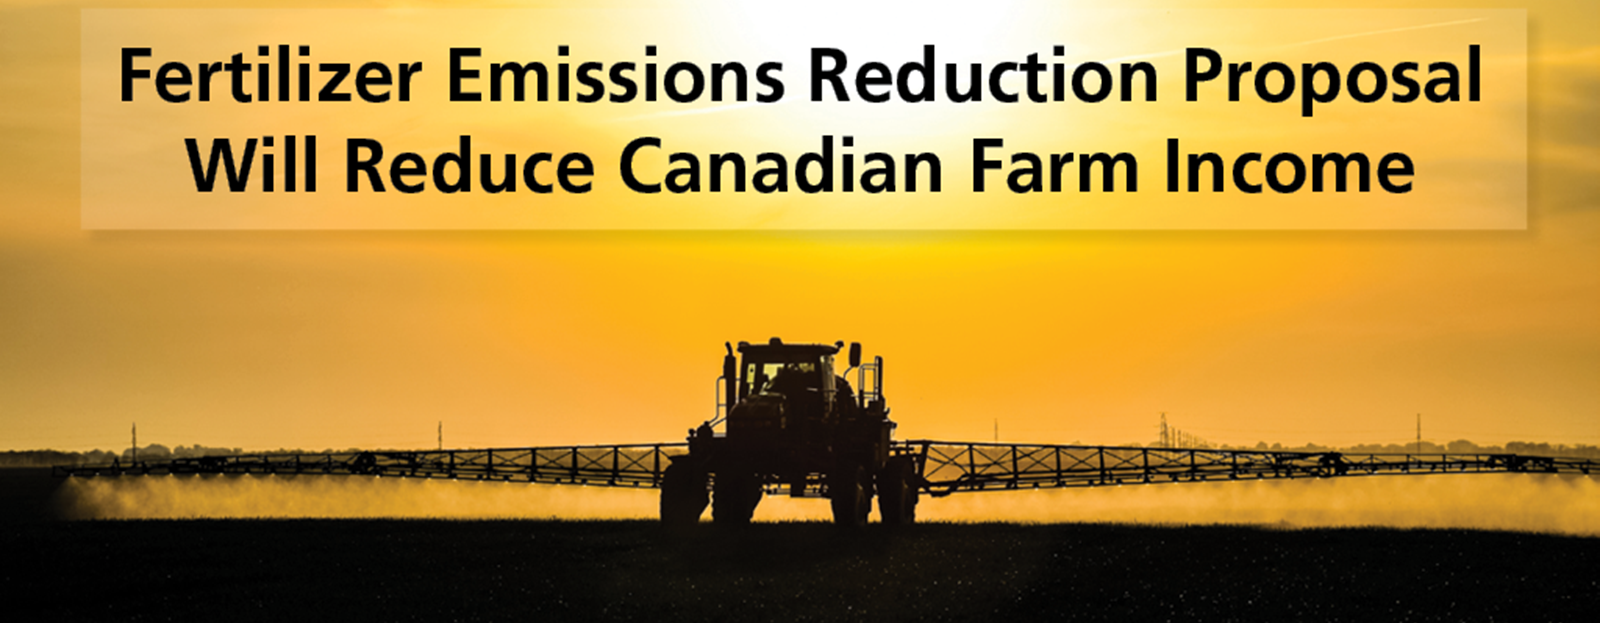 CAAR believes Federal Government Fertilizer Emissions Reduction Mandate  Will Reduce Canadian Farm Income 